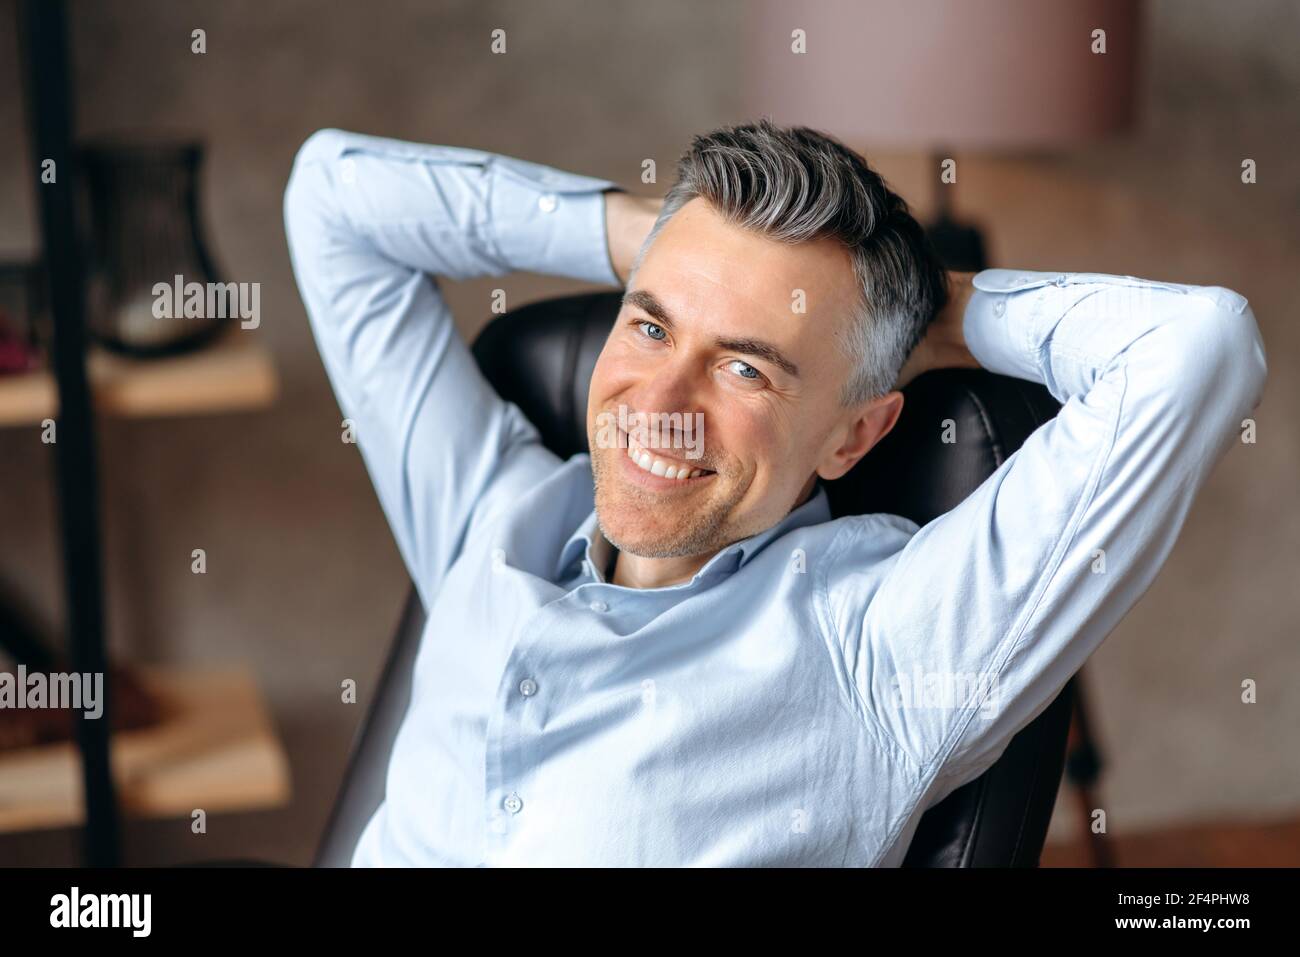 Portrait of a happy caucasian gray-haired man, manager or freelancer, sitting in modern office, wearing formal shirt, having rest from work, clasping his hands behind his head, smiling friendly Stock Photo